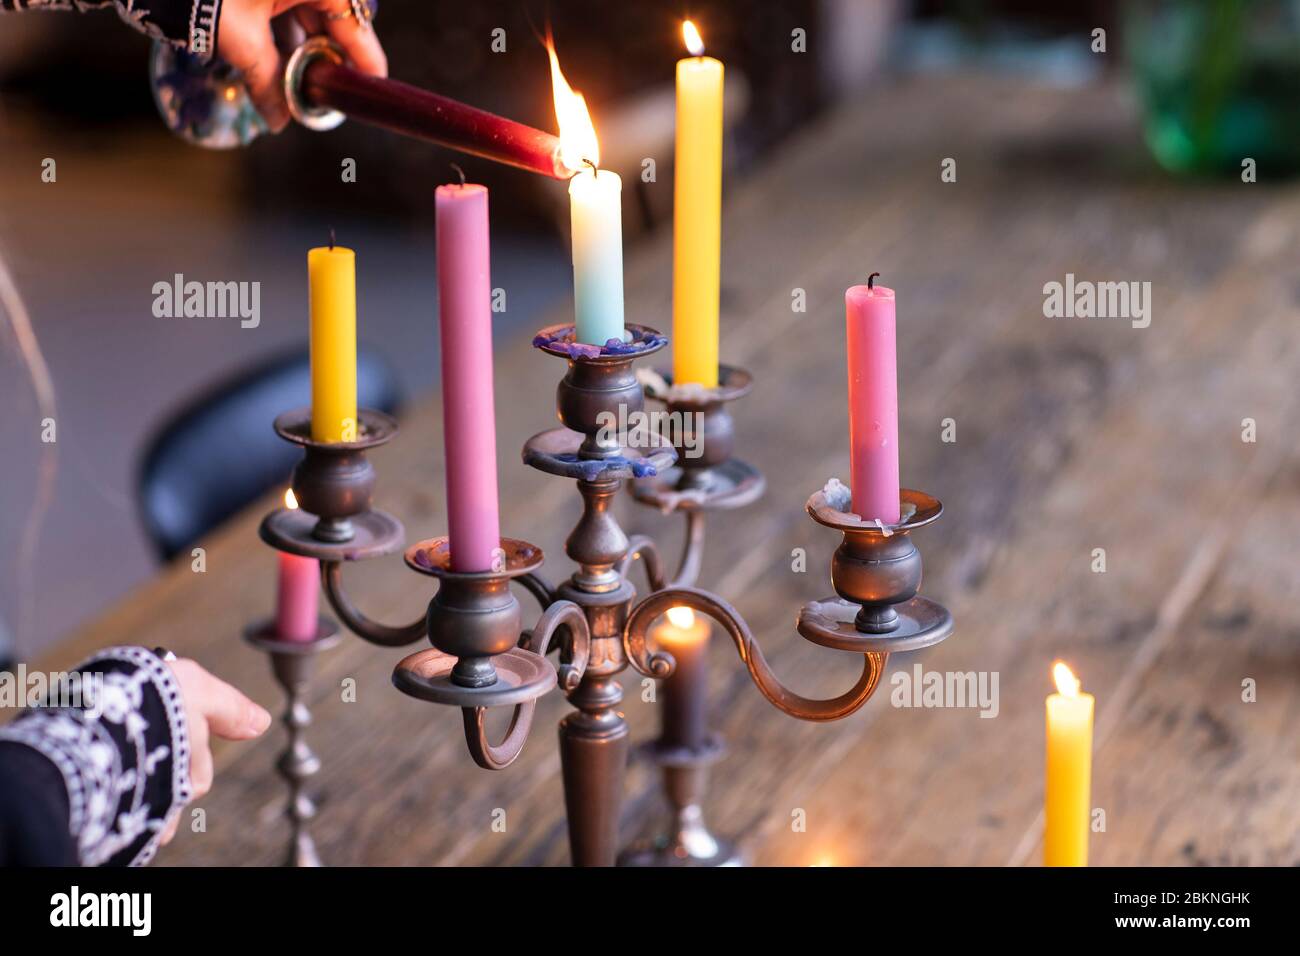 A woman lighting different colored candles in a vintage metal candle holder to create a nice atmosphere in her home. An Eclectic styled living with a Stock Photo